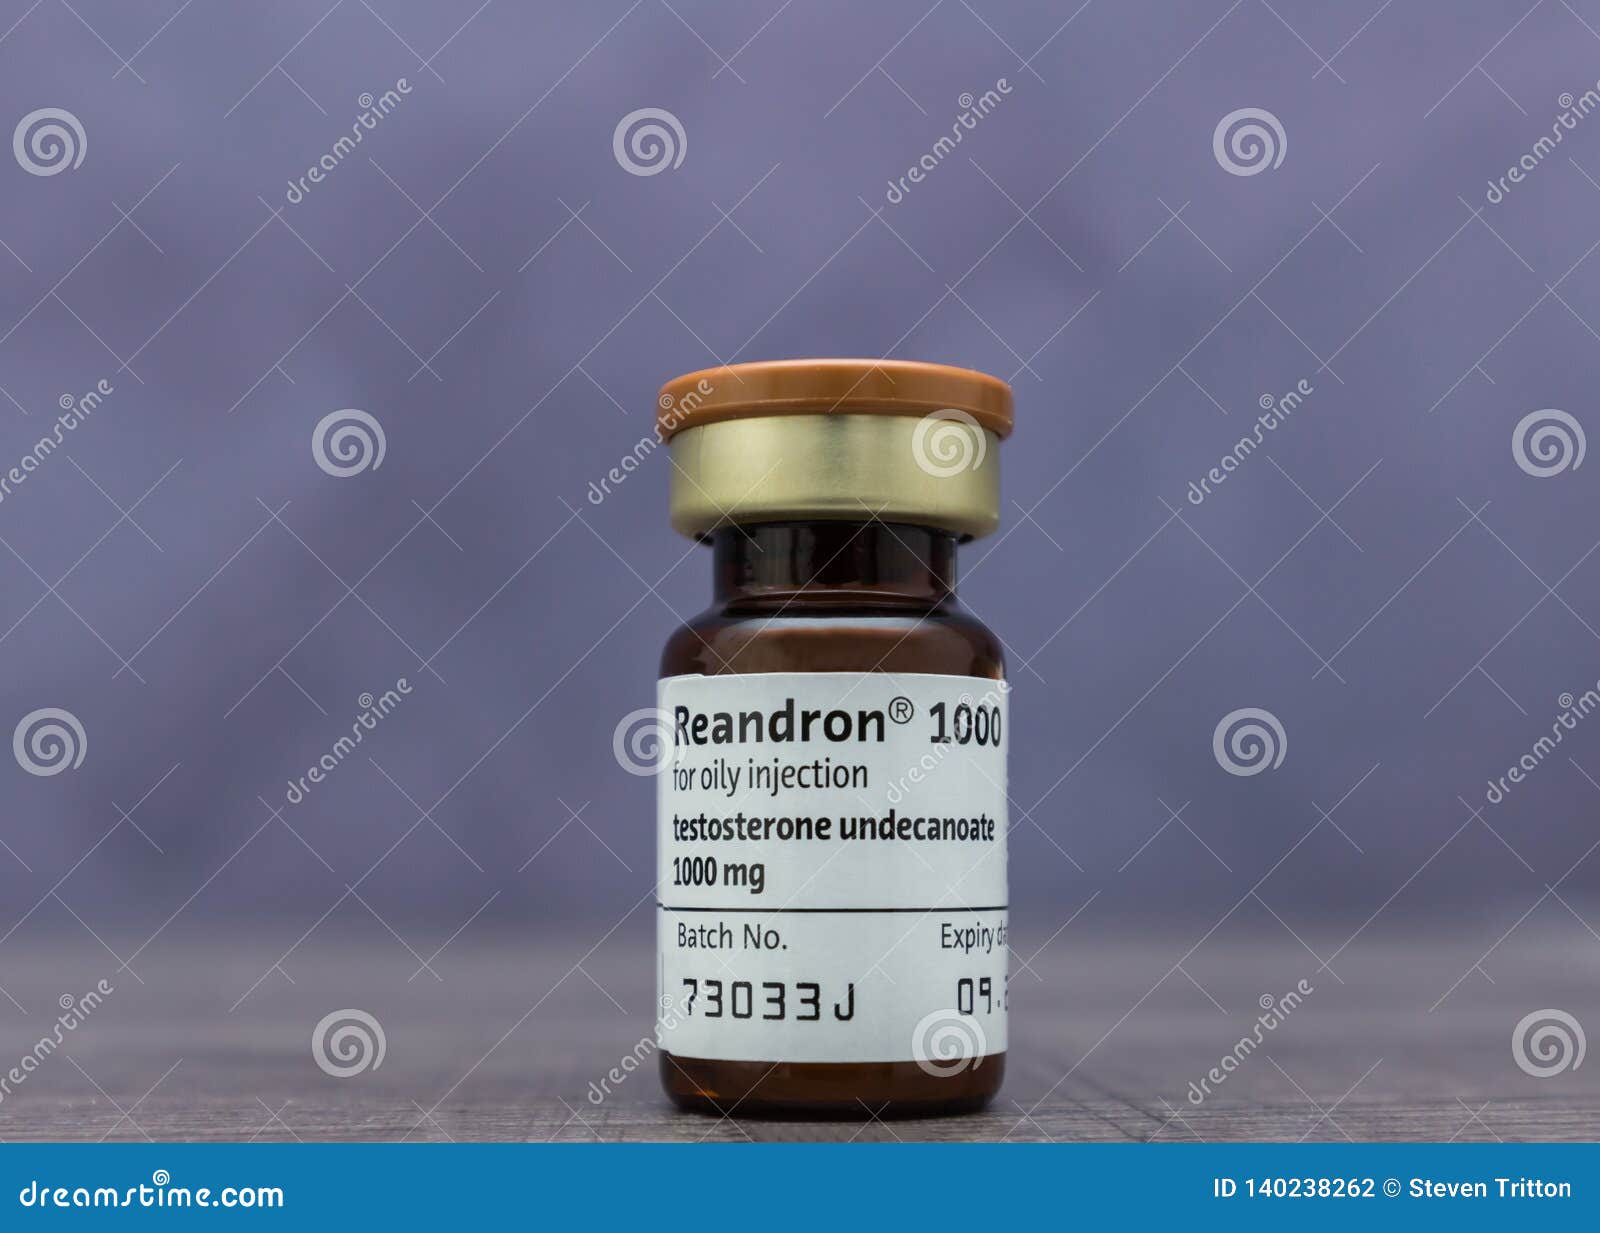 Want More Money? Start Price Nandrolone